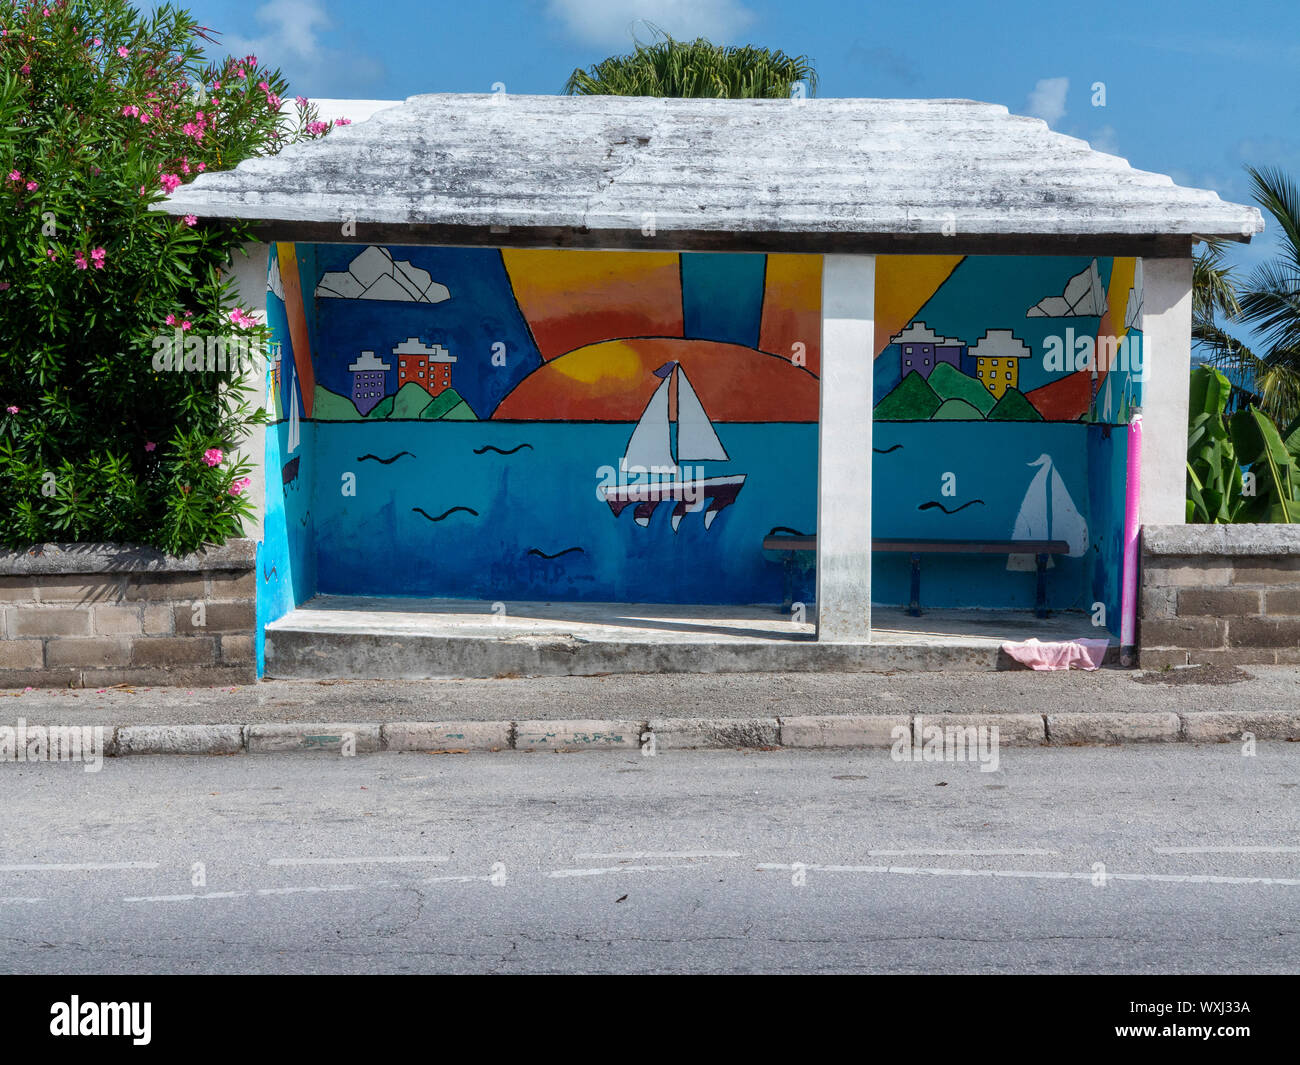 A brightly painted bus shelter on the roadside in Bermuda Stock Photo